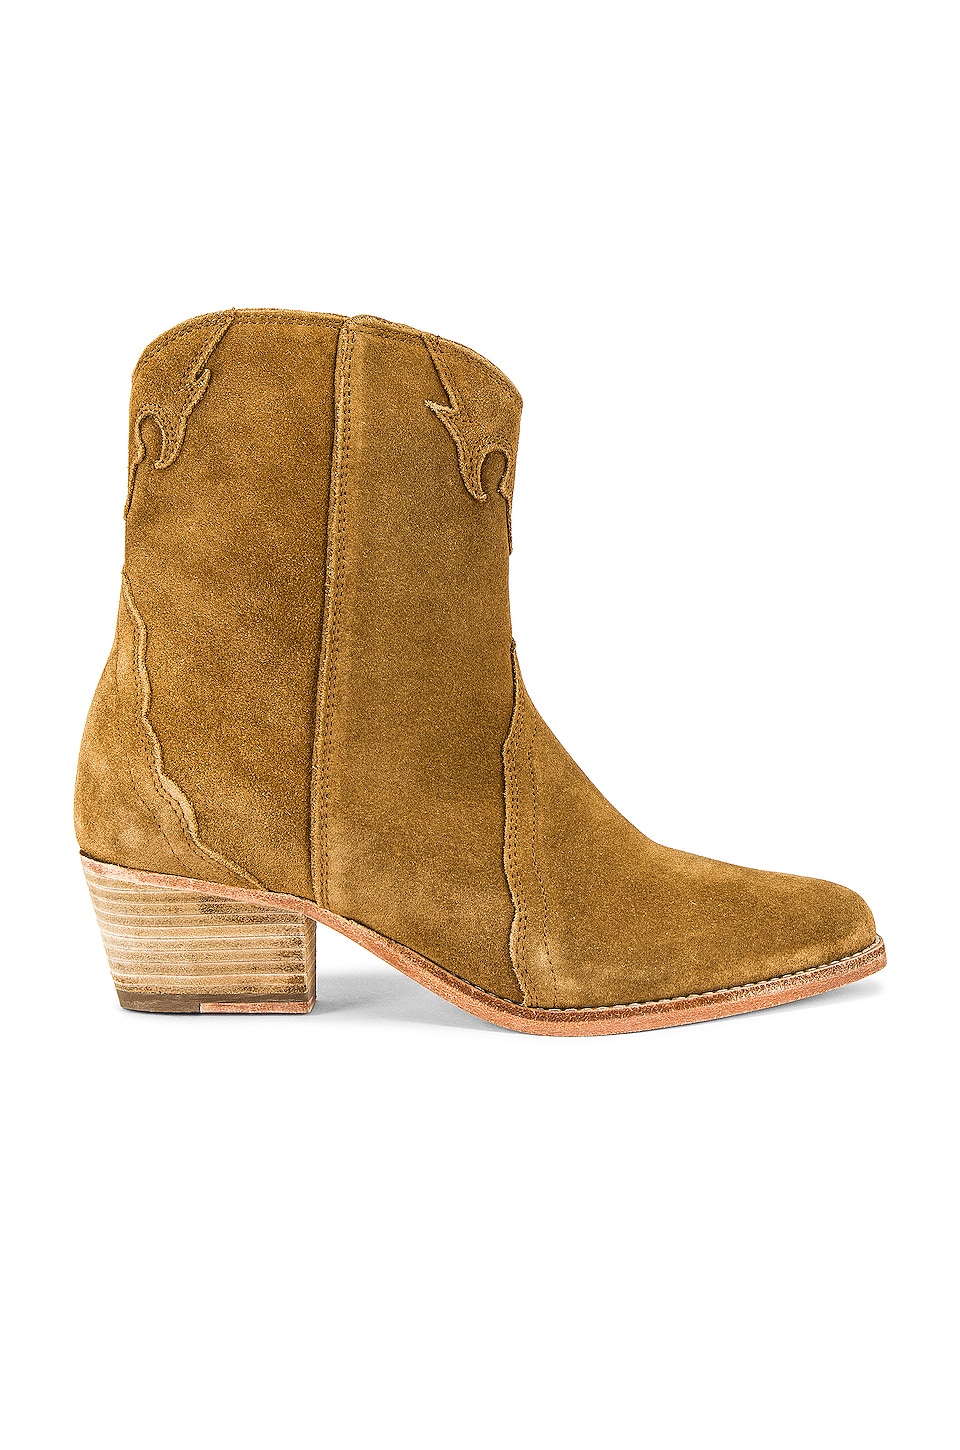 Free People New Frontier Western Boot in Camel Suede